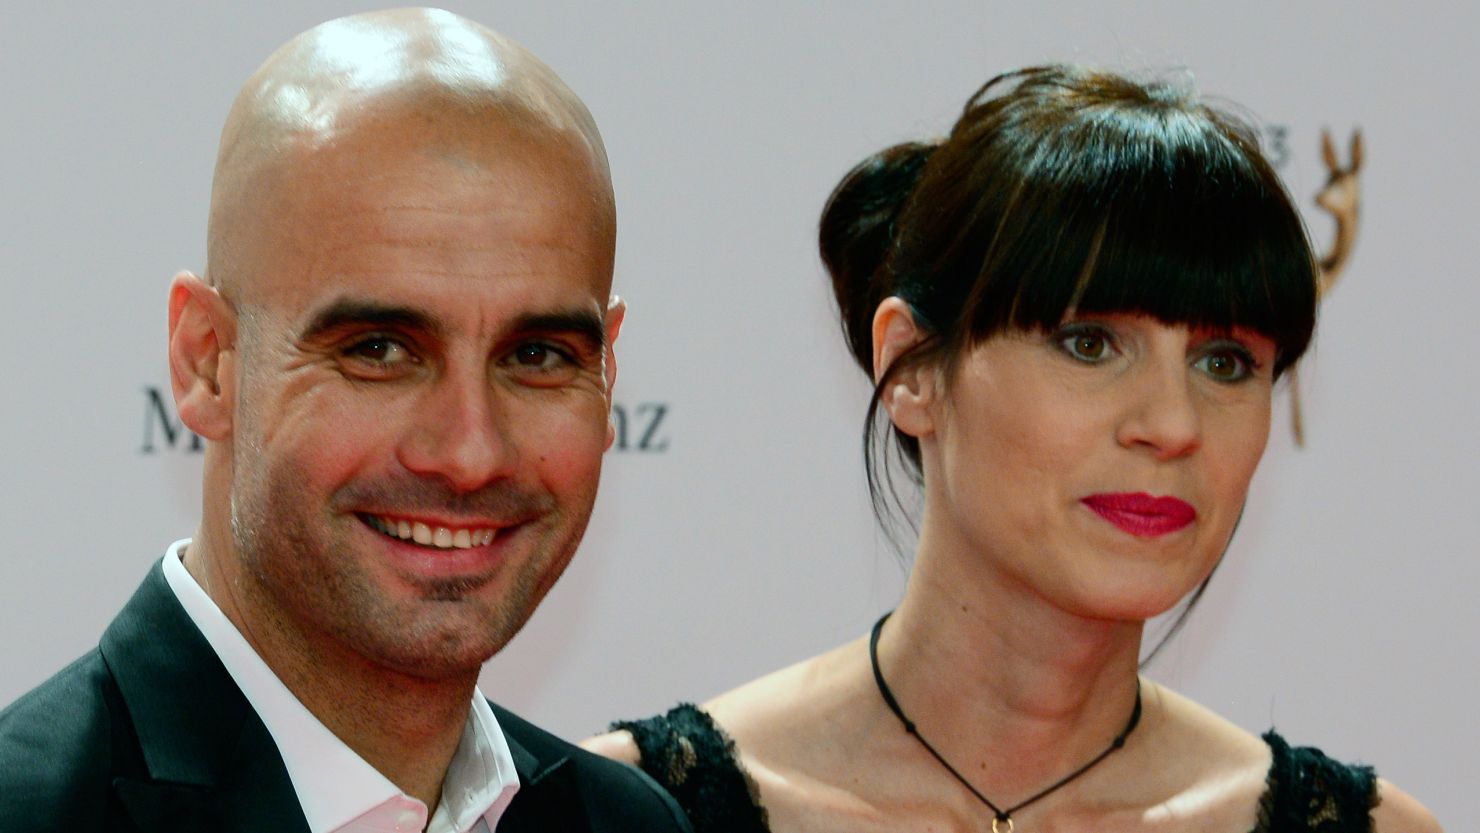 Guardiola is pictured with his wife Christina.